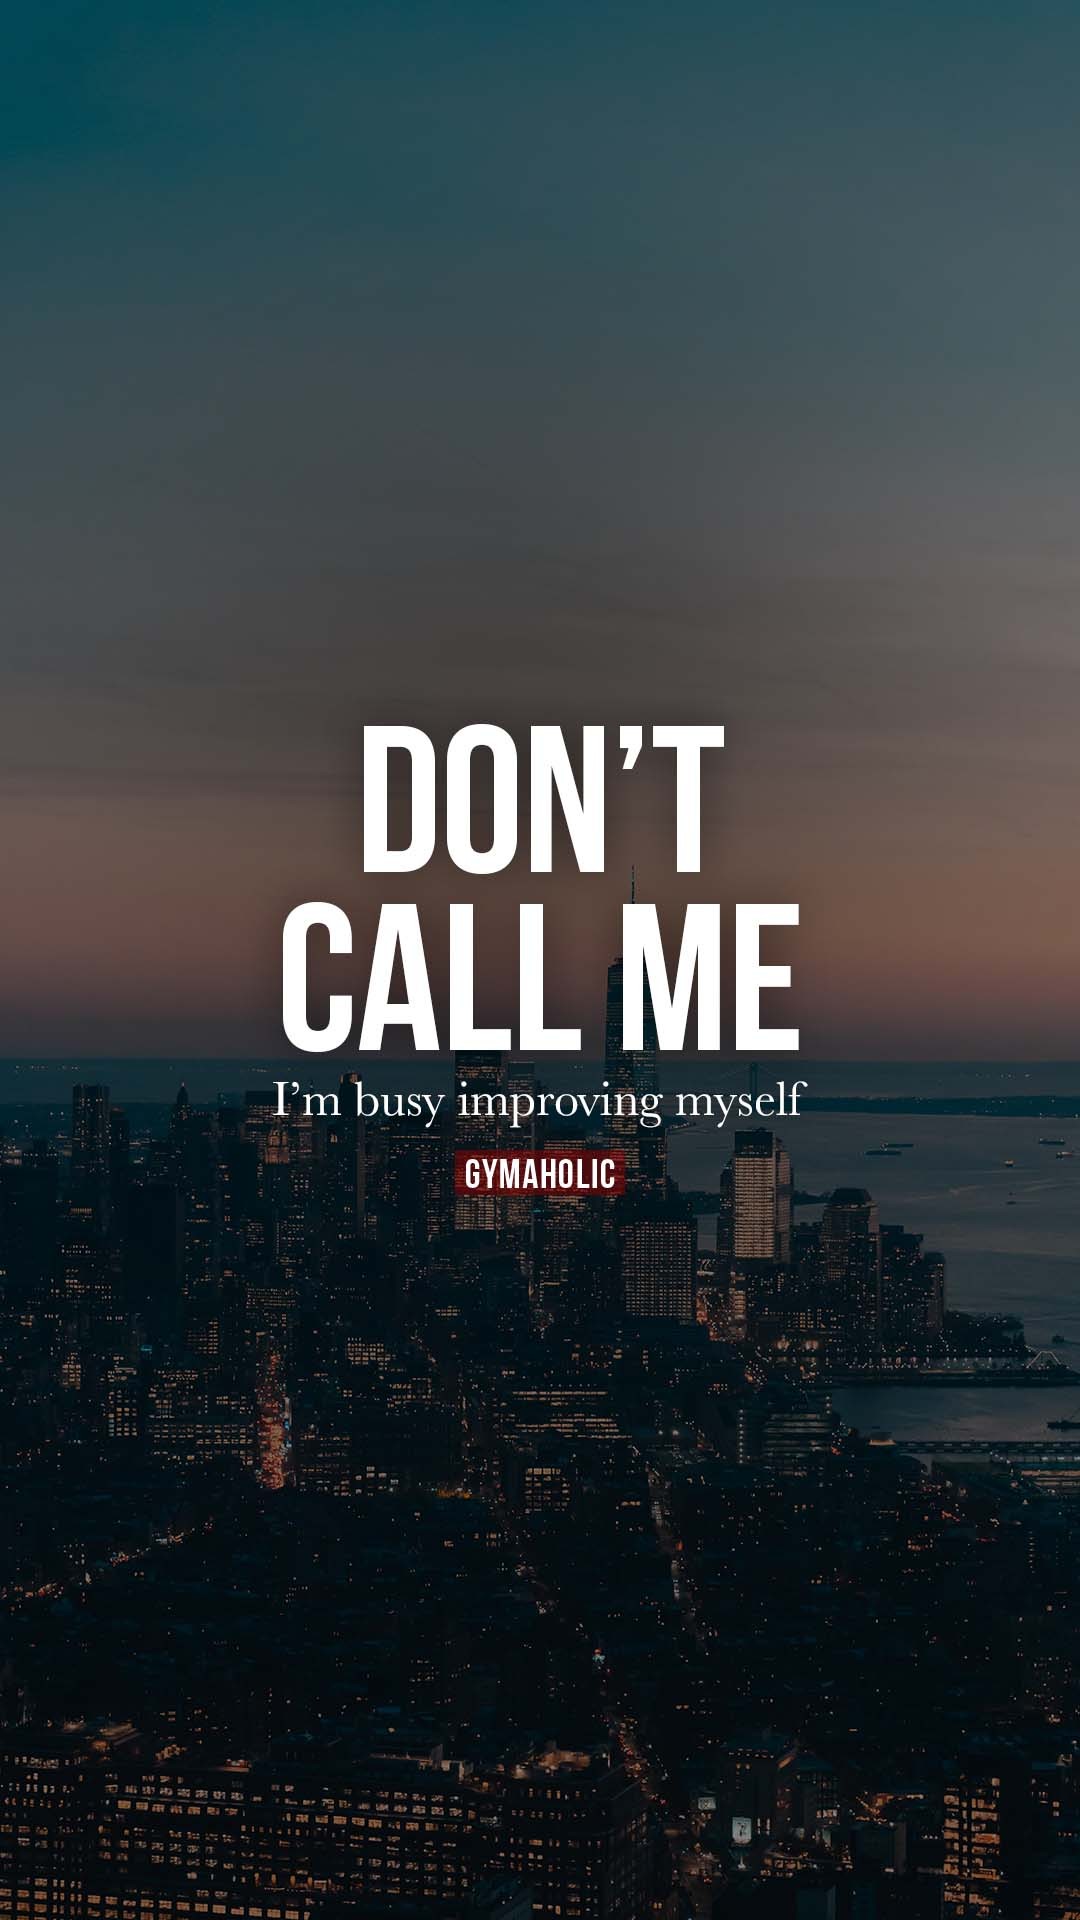 Don’t call me, I’m busy improving myself